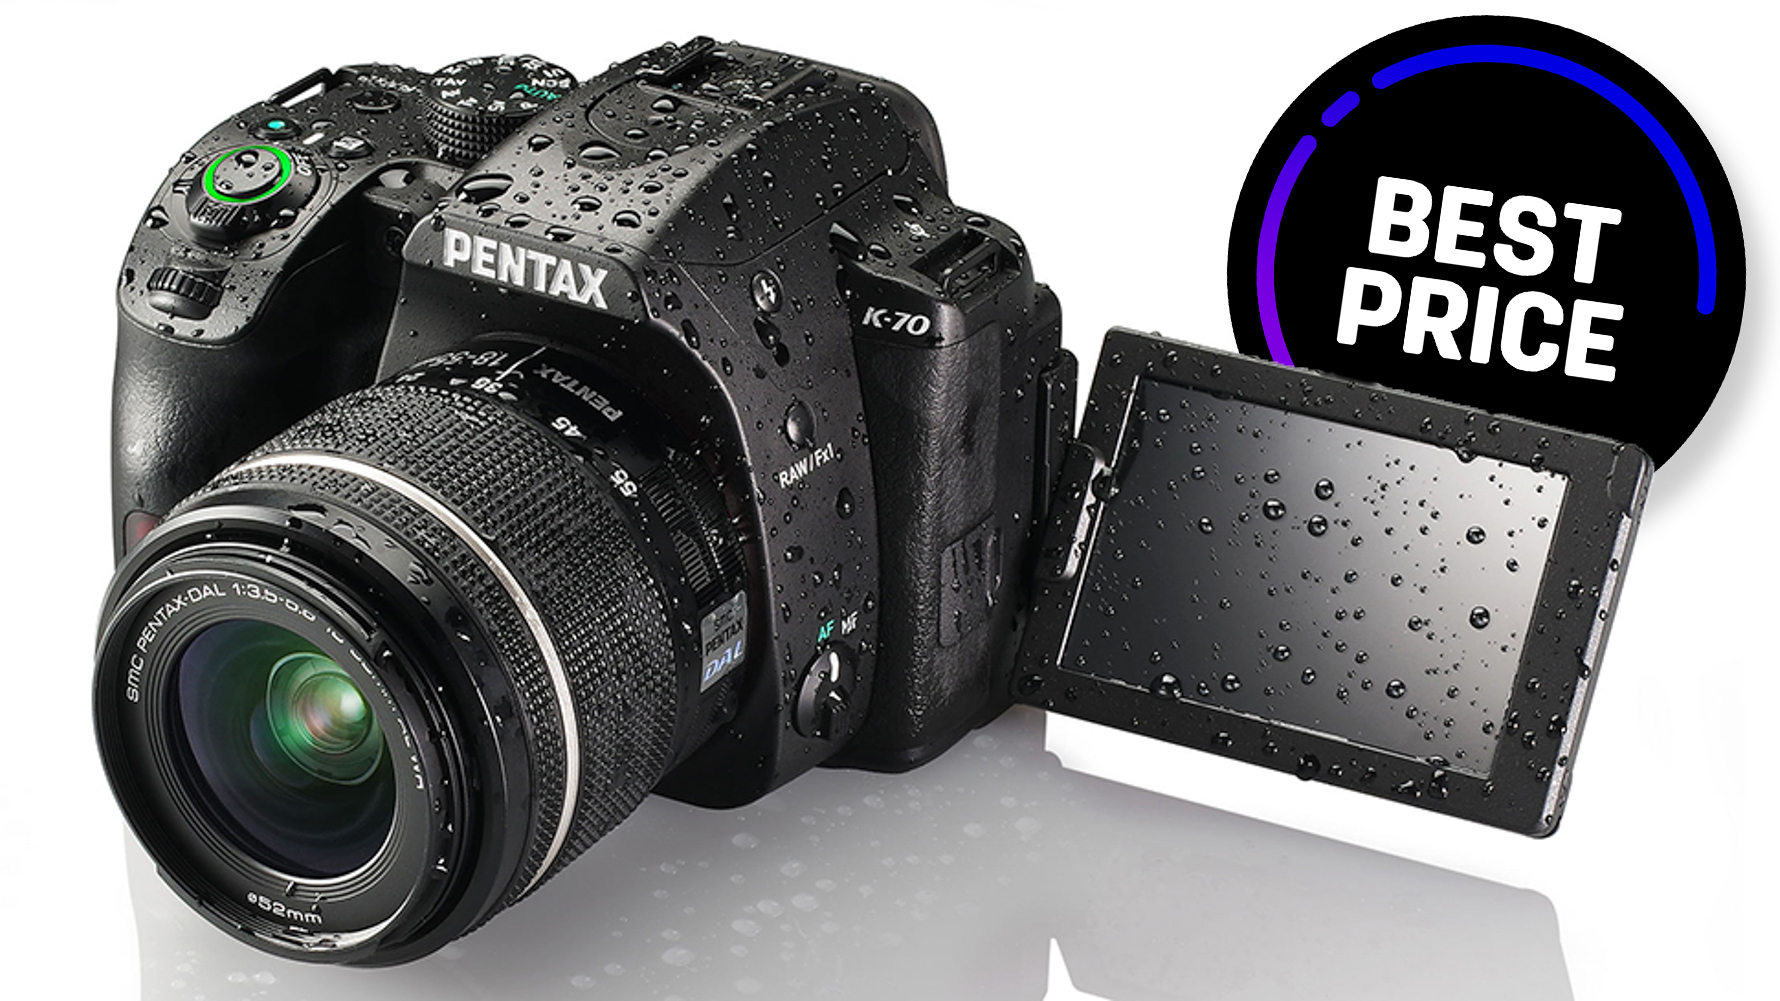 Pentax K70 DSLR camera drops down to its best-ever price